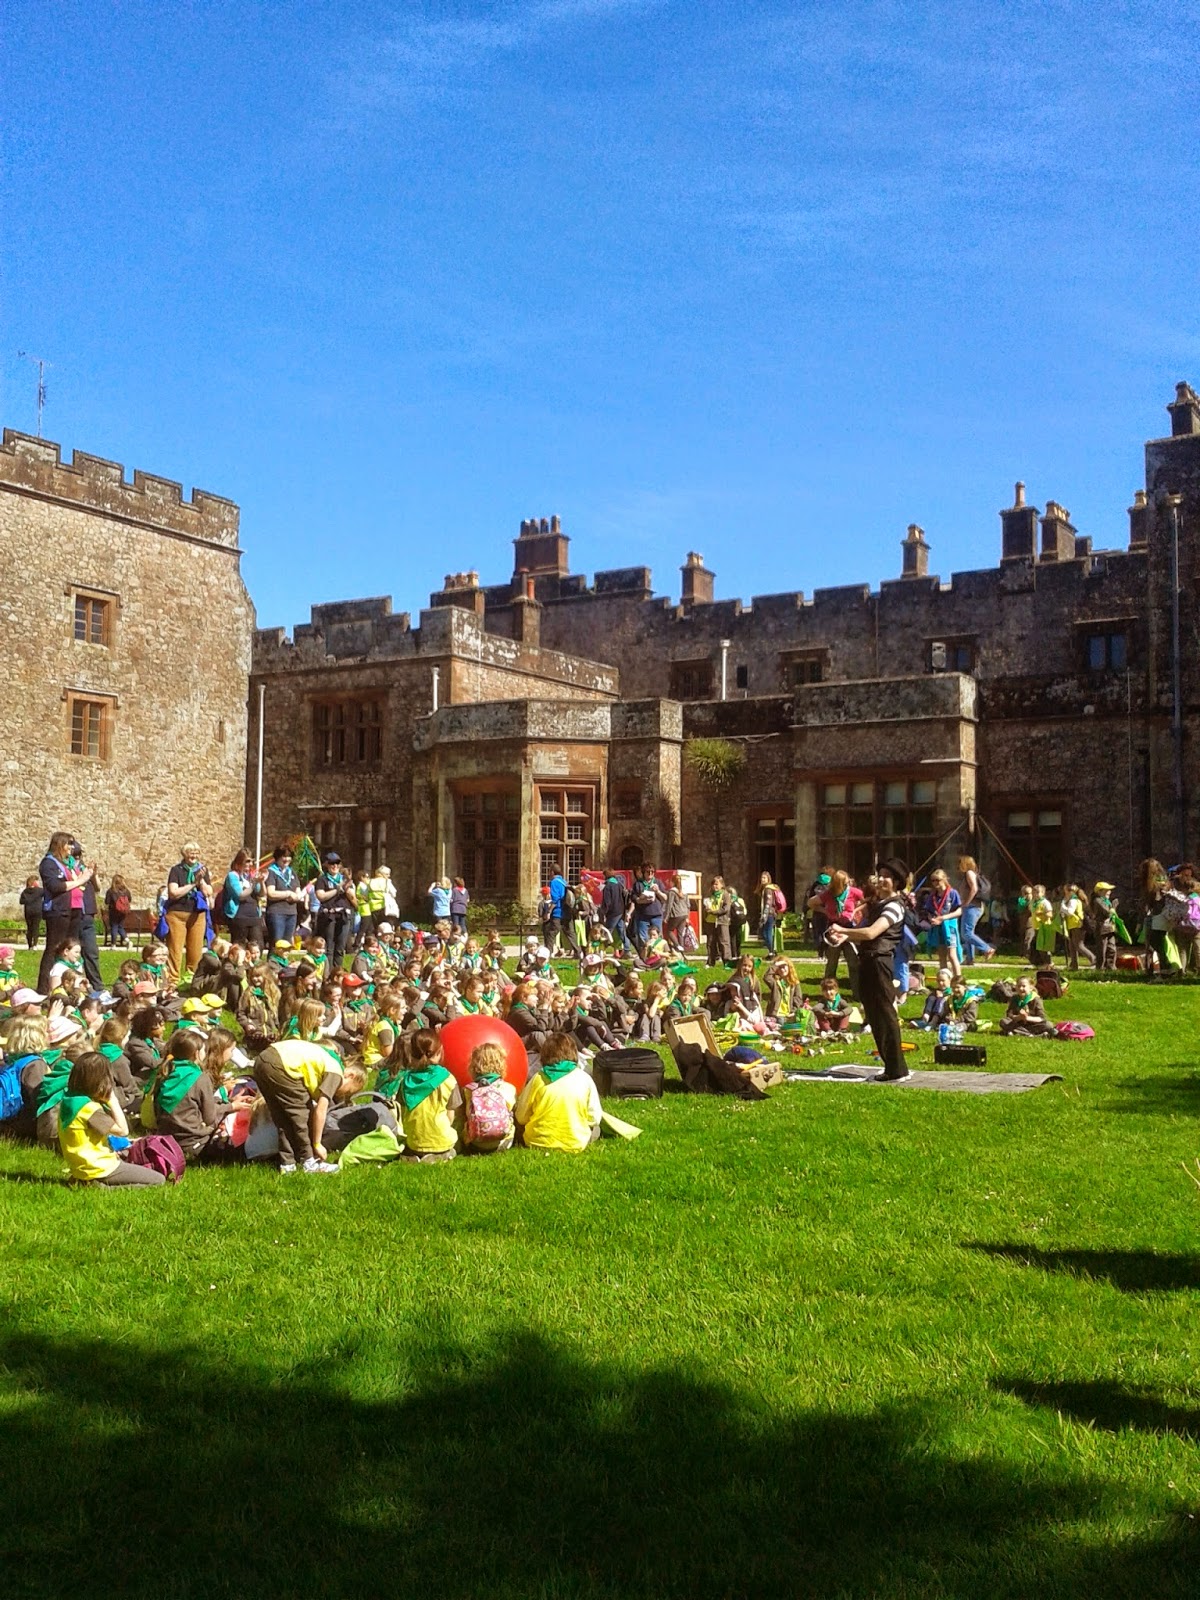 Brownie birthday celebrations which took place at Muncaster Castle 2014